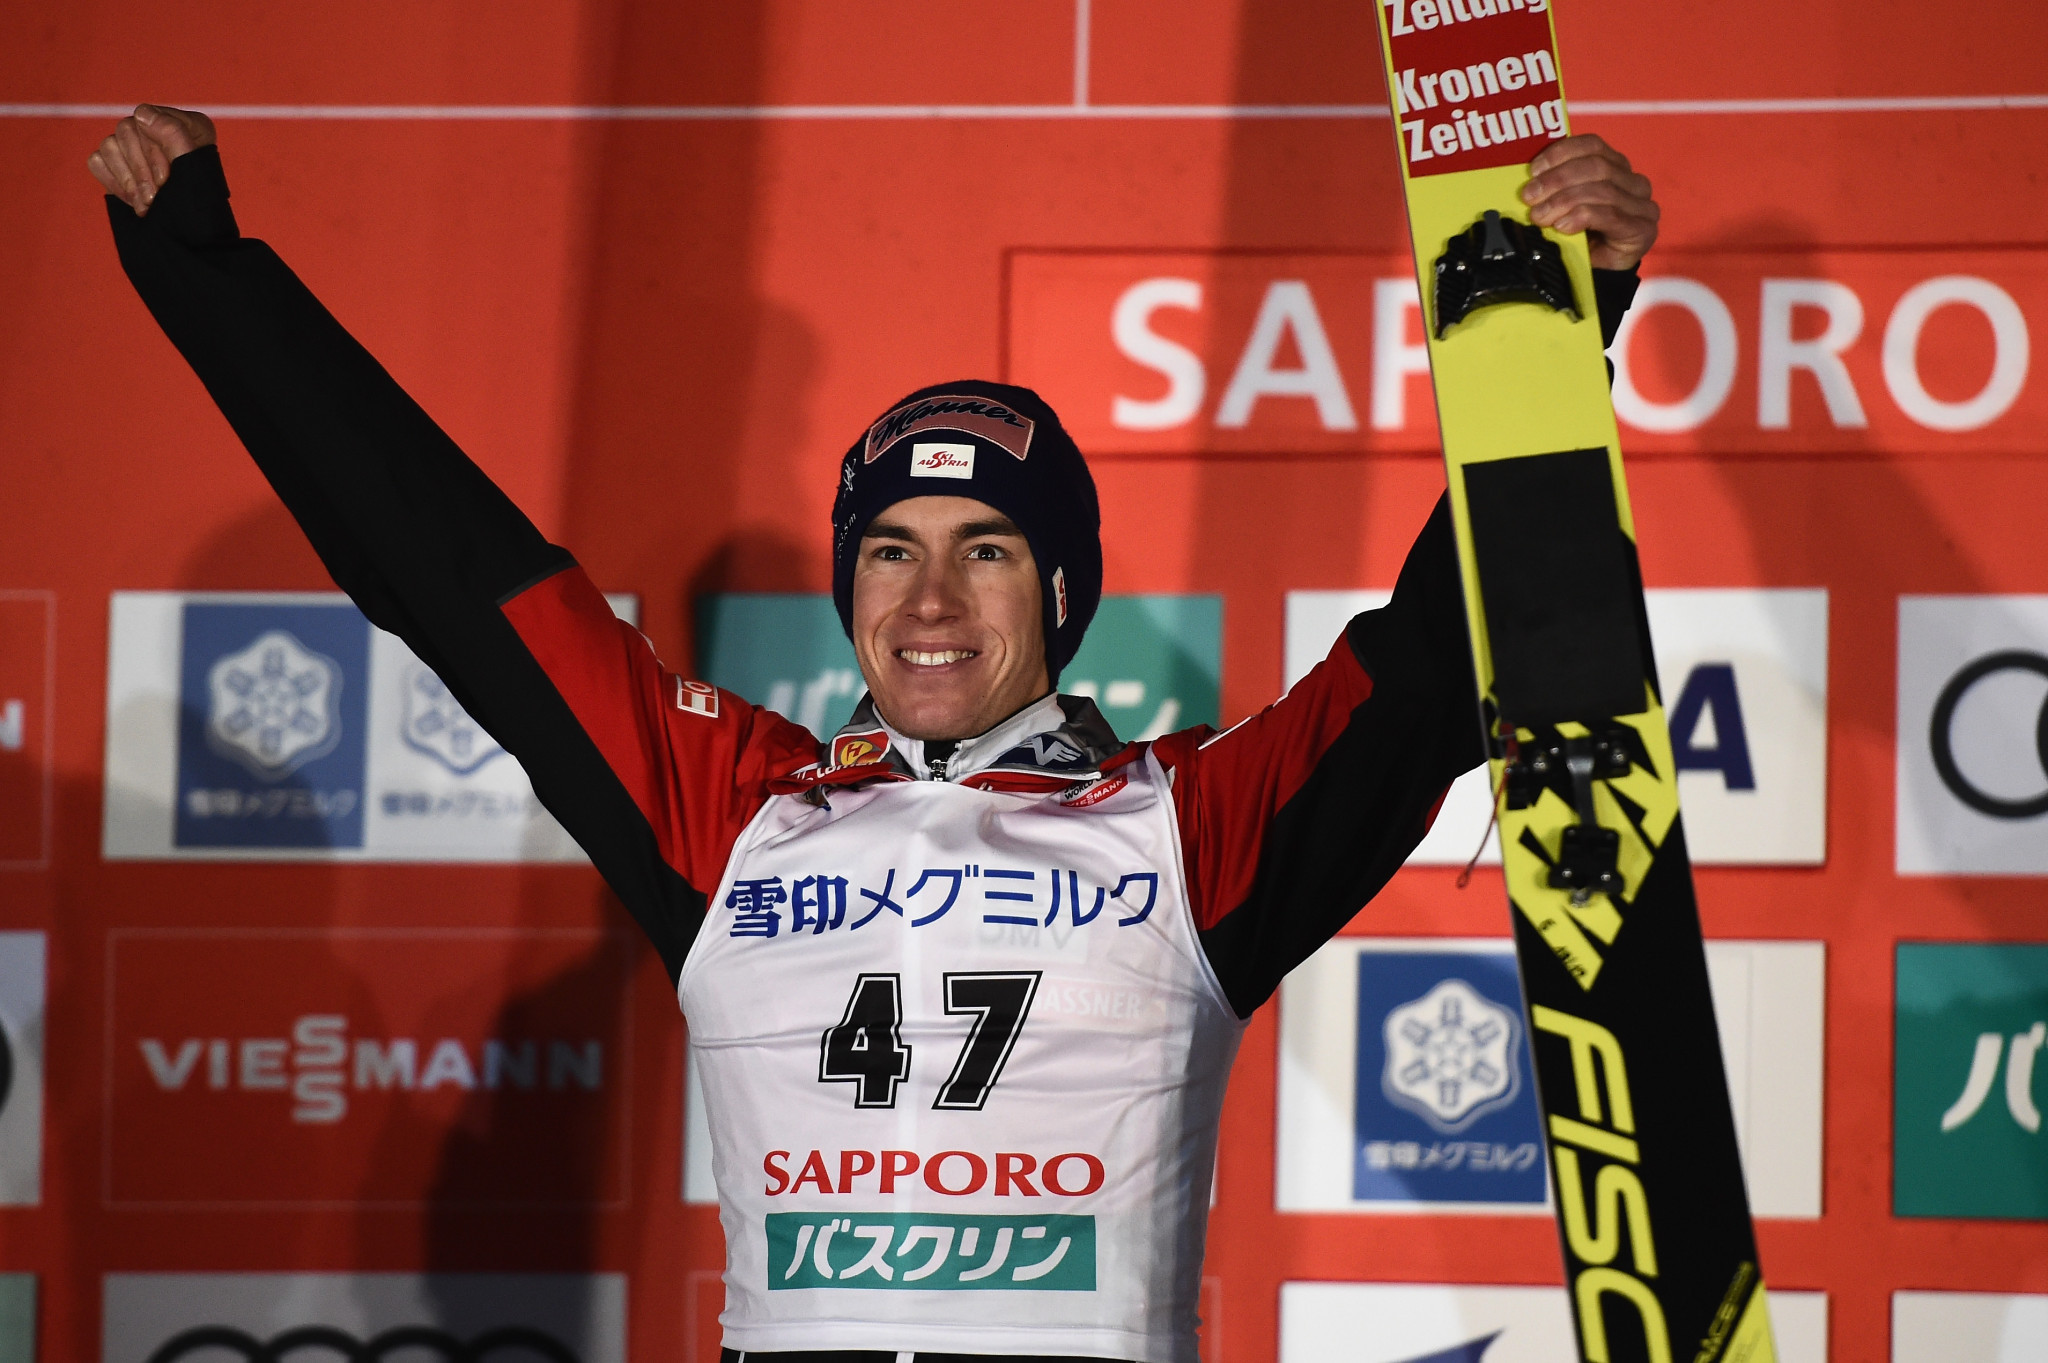 Kraft wins in Sapporo as Stoch sets new hill record at FIS Ski Jumping World Cup